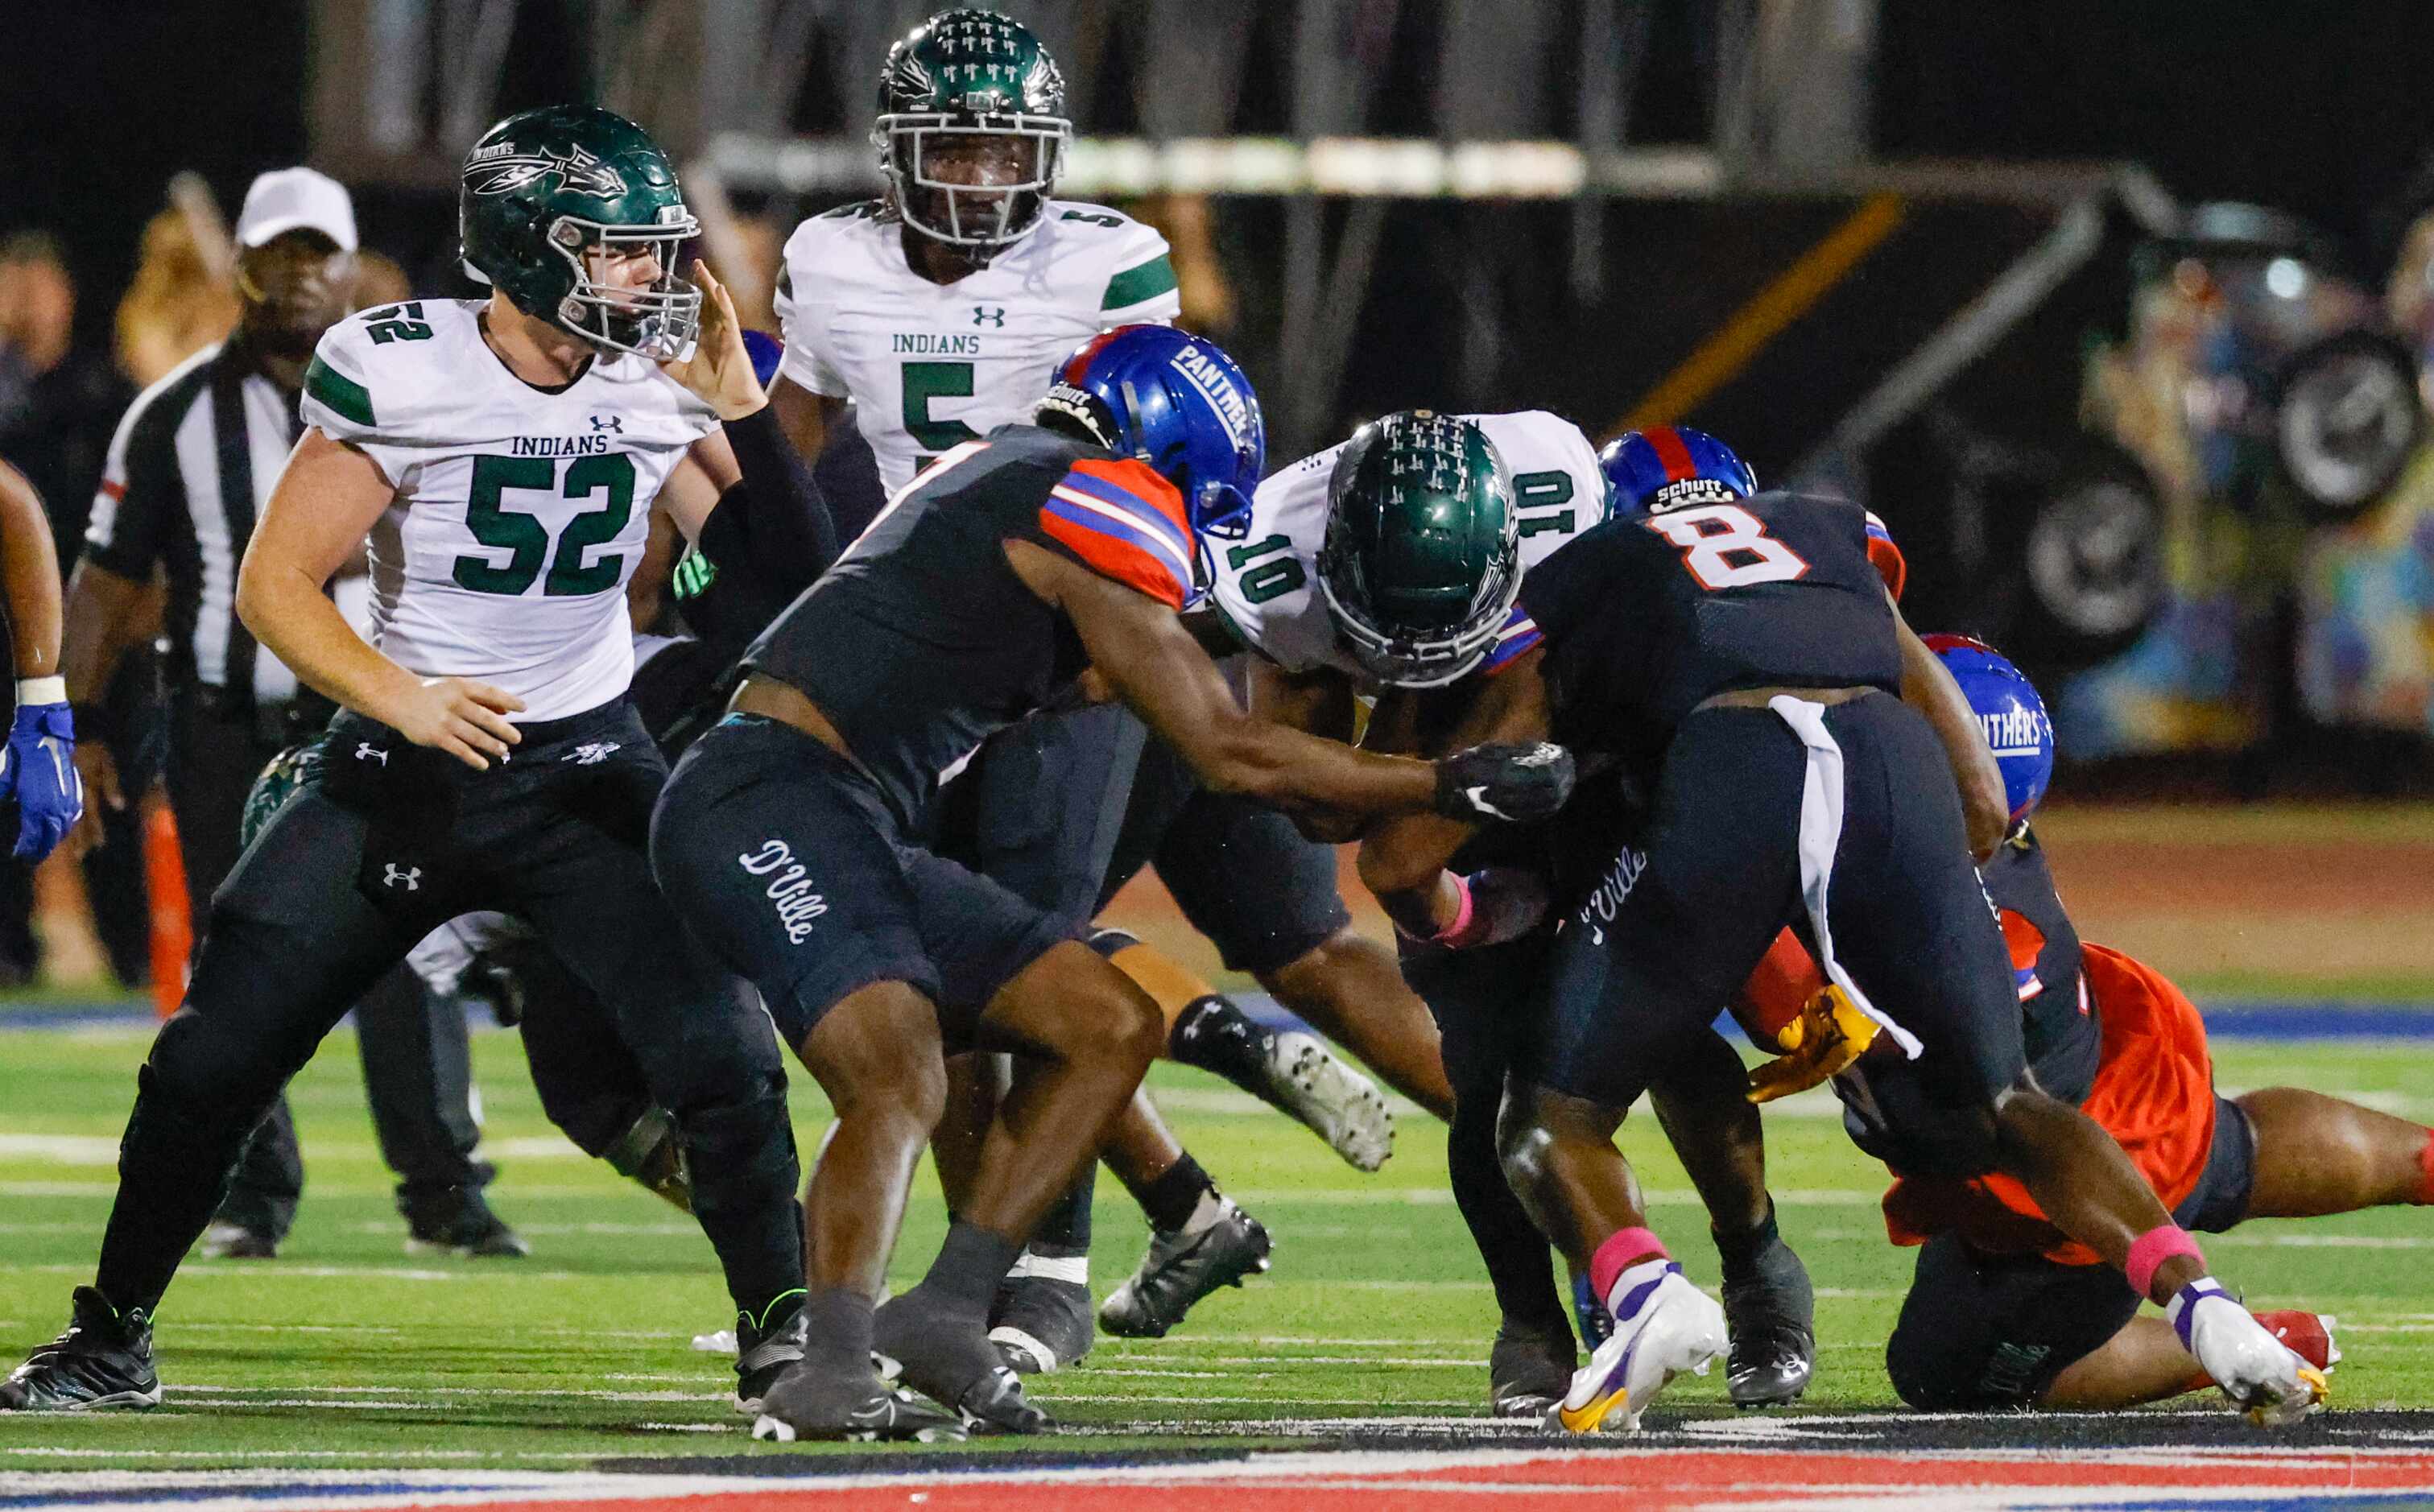 Duncanville line backer Colin Simmons (8) assists in tackling Waxahachie quarterback...